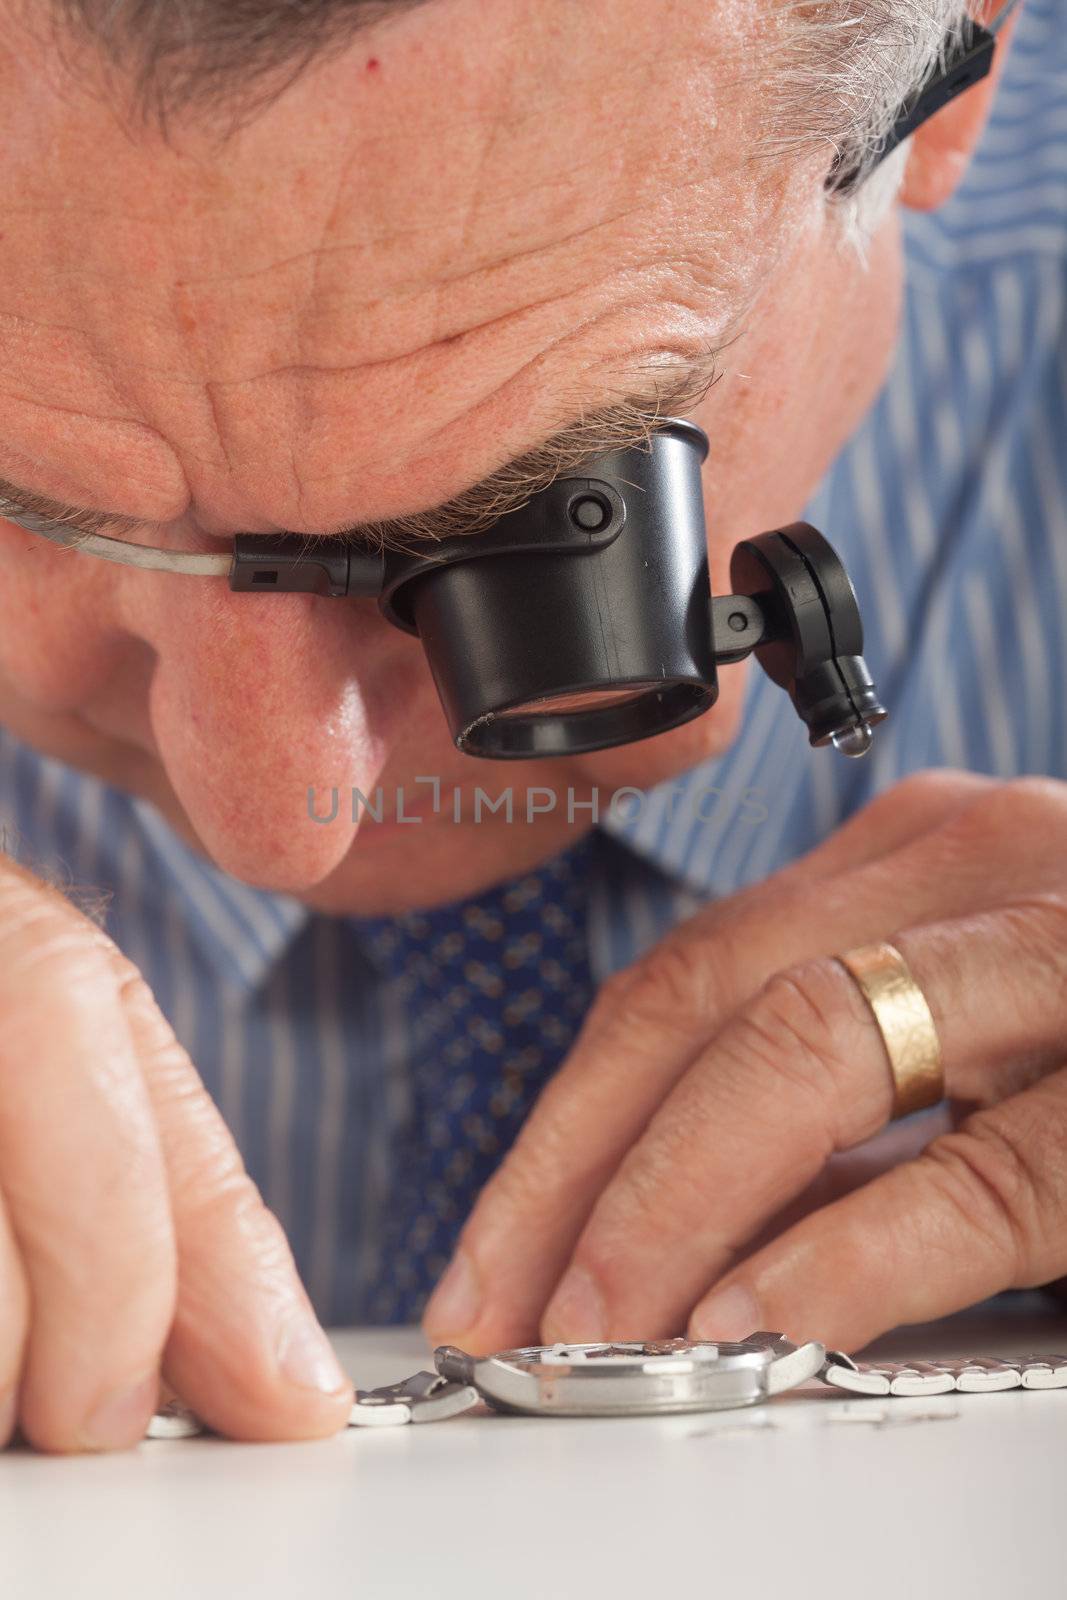 Watchmaker With Magnifying Glasses by Daniel_Wiedemann